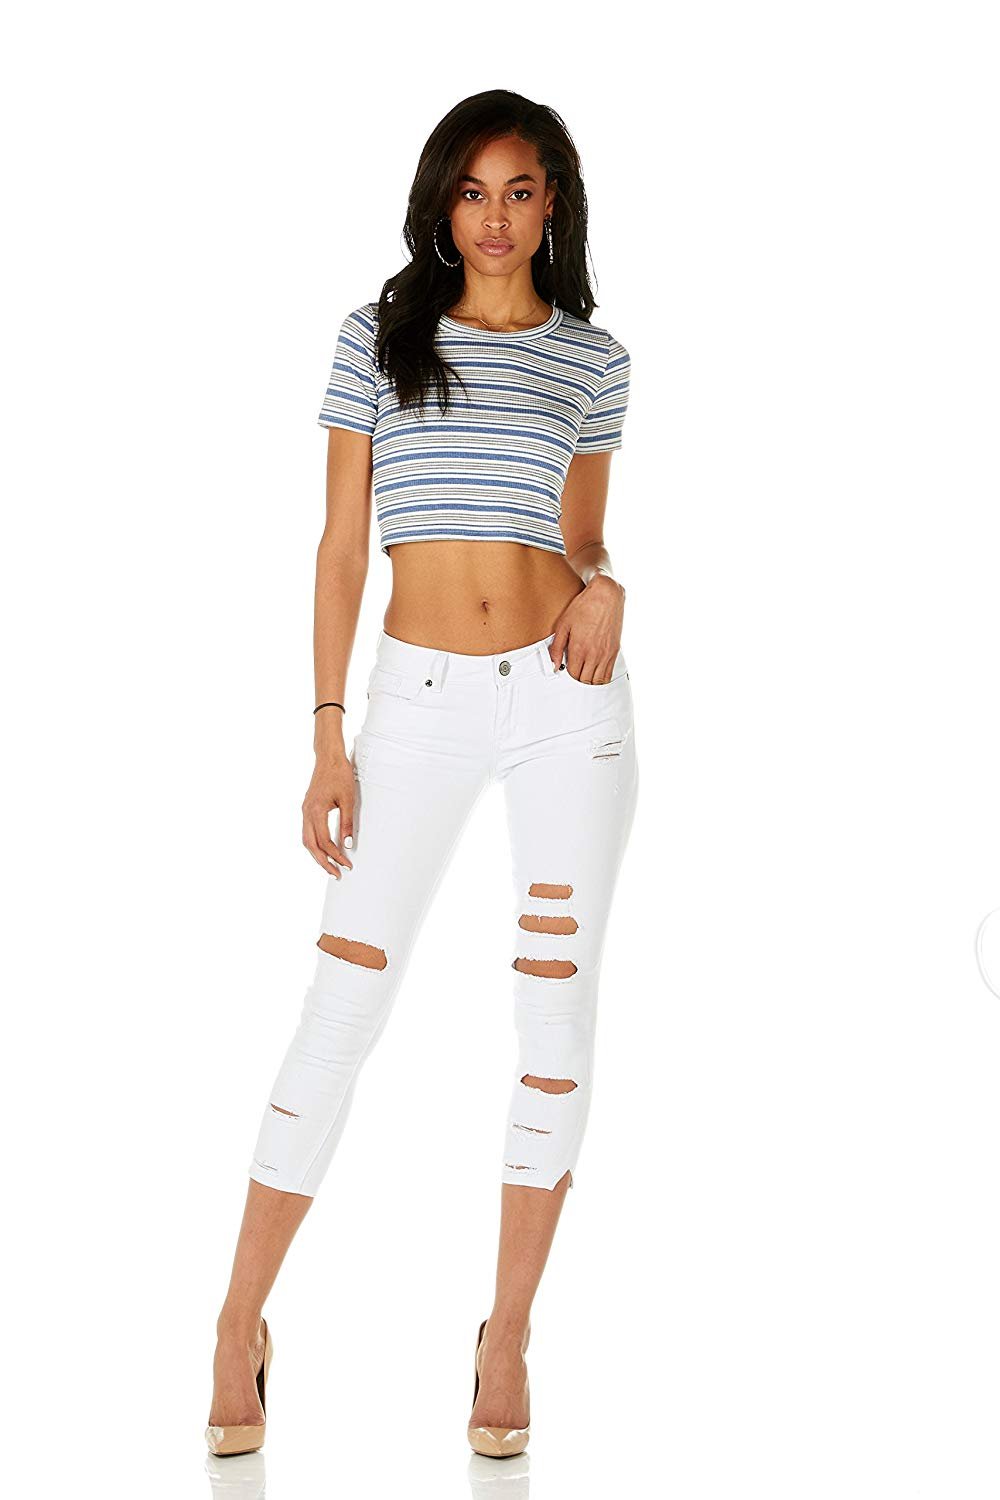 CG JEANS Plus Size Cute Juniors Big Mid Rise Large Ripped Torn Crop Skinny Fit, White Denim 24 - image 5 of 7